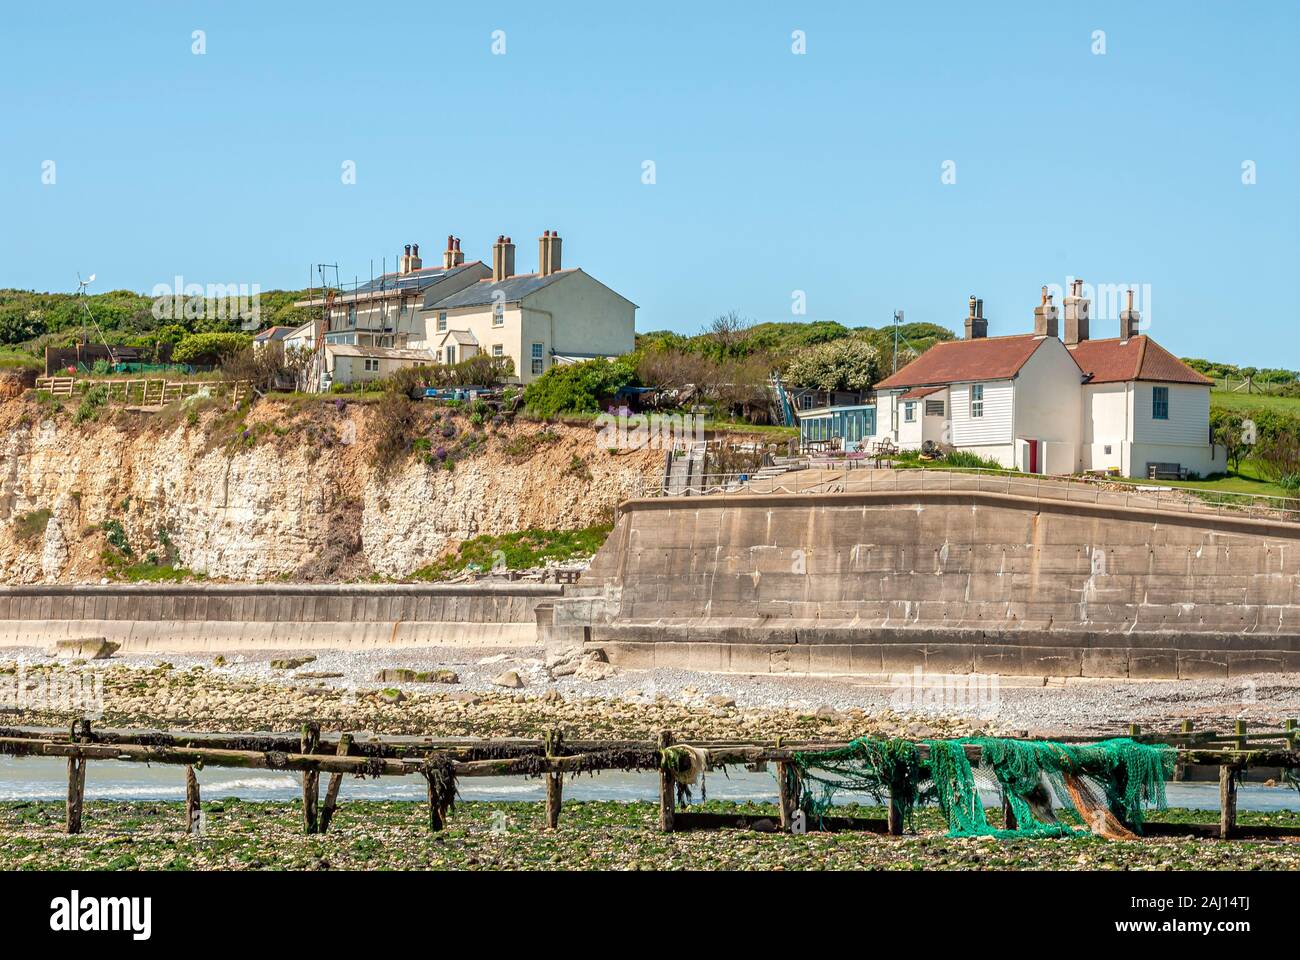 Coast guard cottages at the Seven Sisters Country Park, East Sussex, England, UK Stock Photo